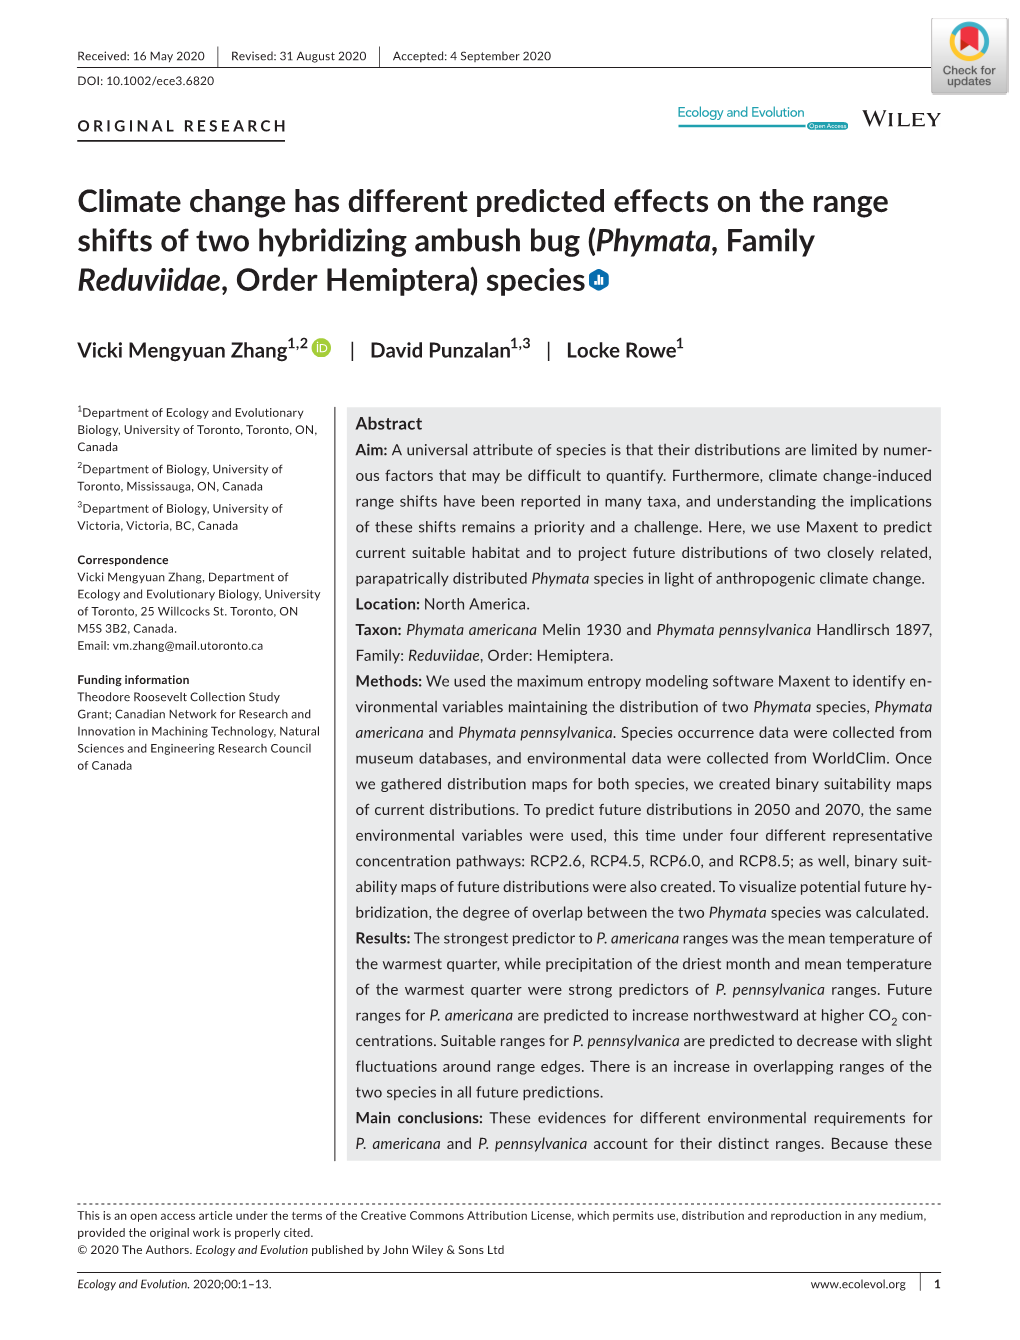 Climate Change Has Different Predicted Effects on the Range Shifts of Two Hybridizing Ambush Bug (Phymata, Family Reduviidae, Order Hemiptera) Species